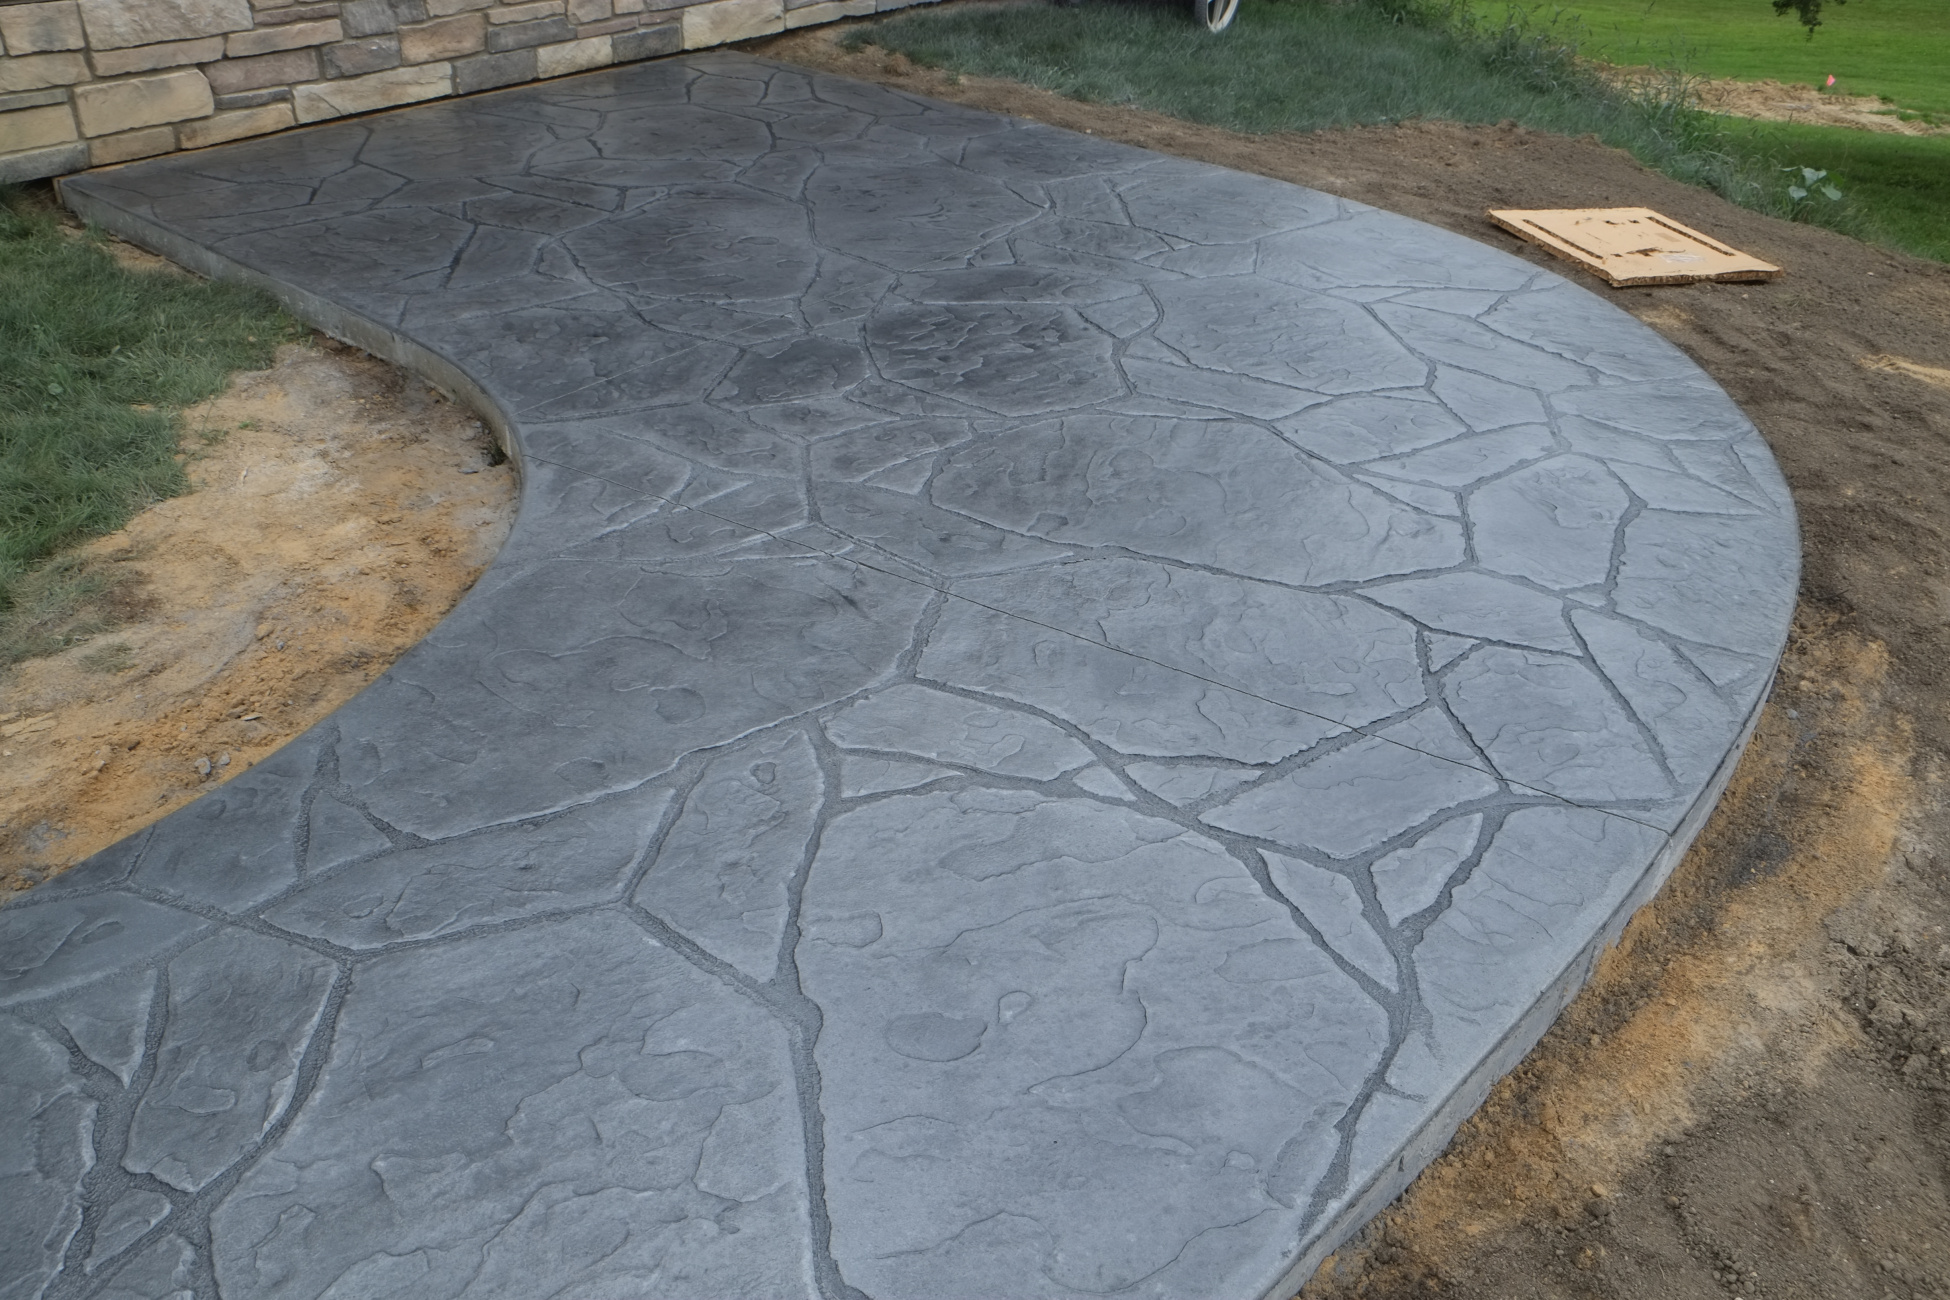 Arizona Flagstone sidewalk in Lt. gray intregal color and med. gray antique